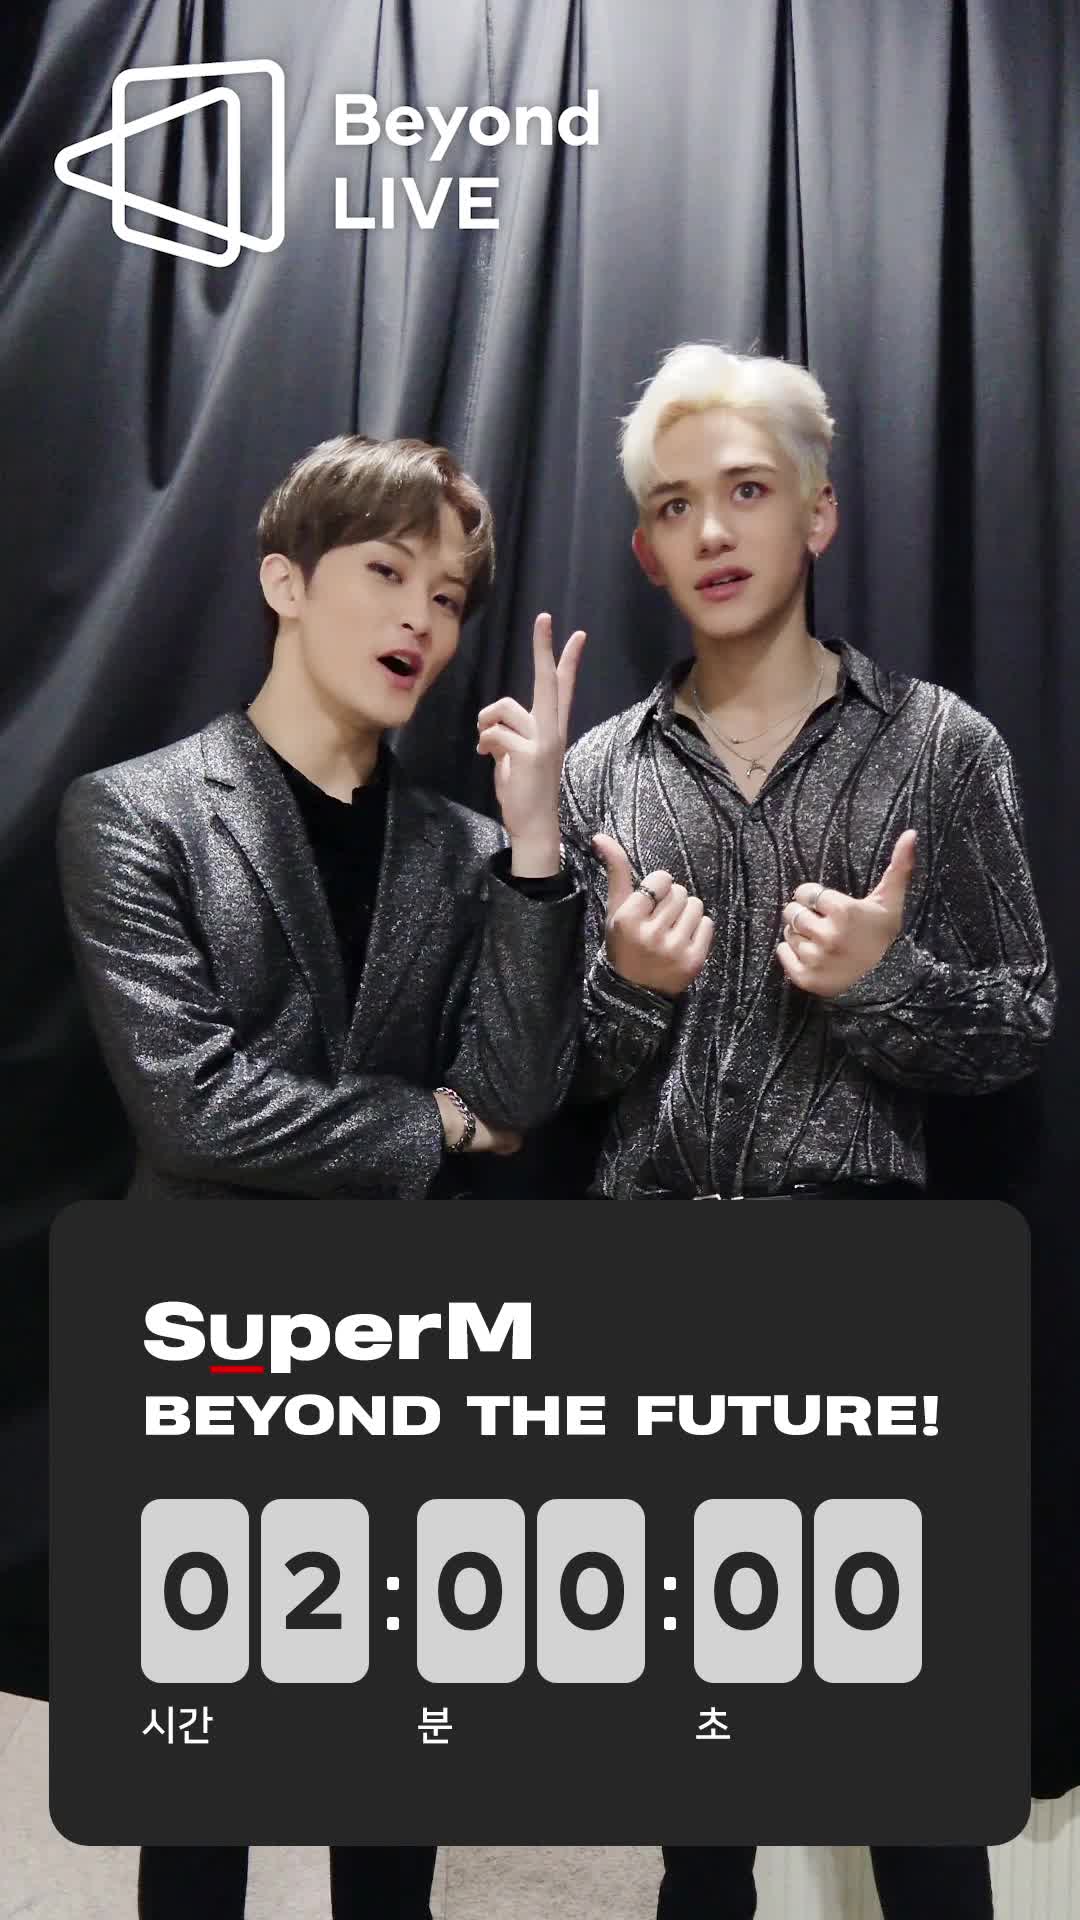 ‘SuperM Beyond the Future’ D-DAY🔥ONLY ✌🏻2 HOURS TO GO!!⏰